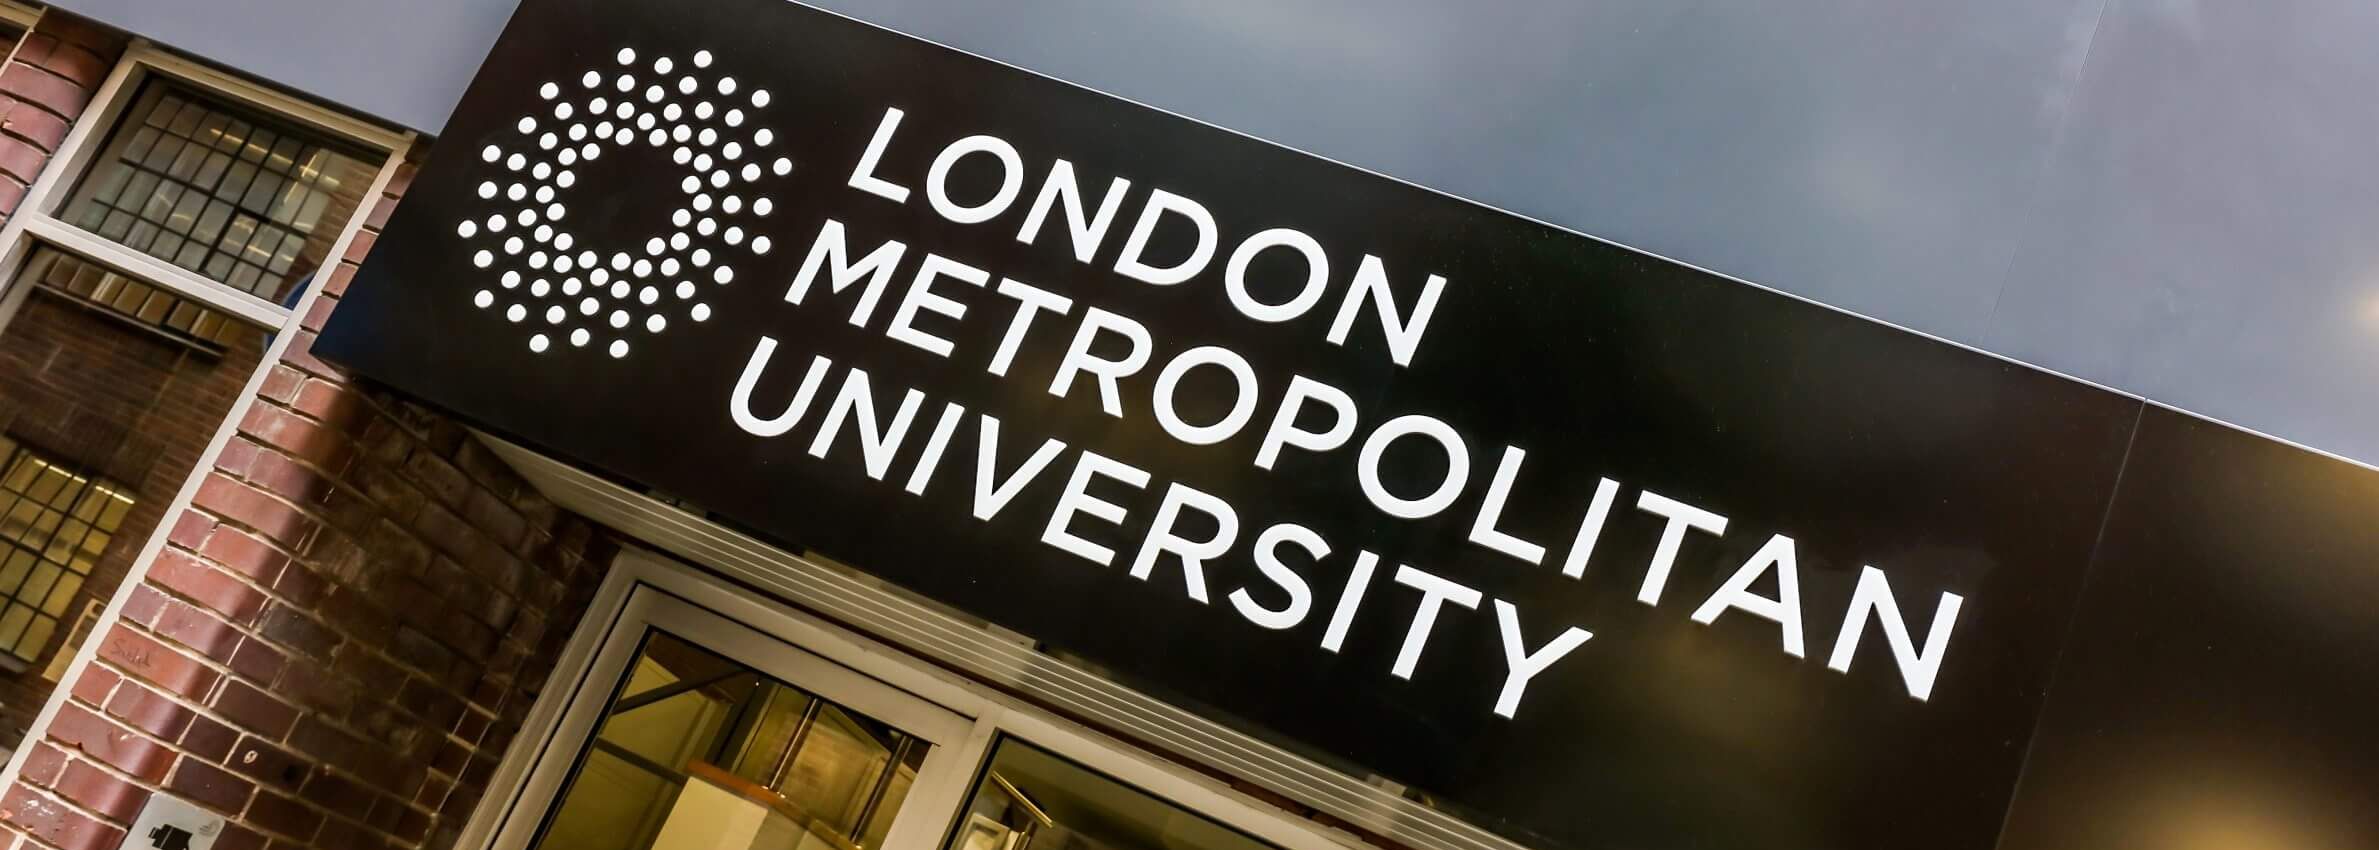 London Metropolitan University to use mySecondTeacher as the academic delivery platform for online degree in Business Administration degree in Indonesia